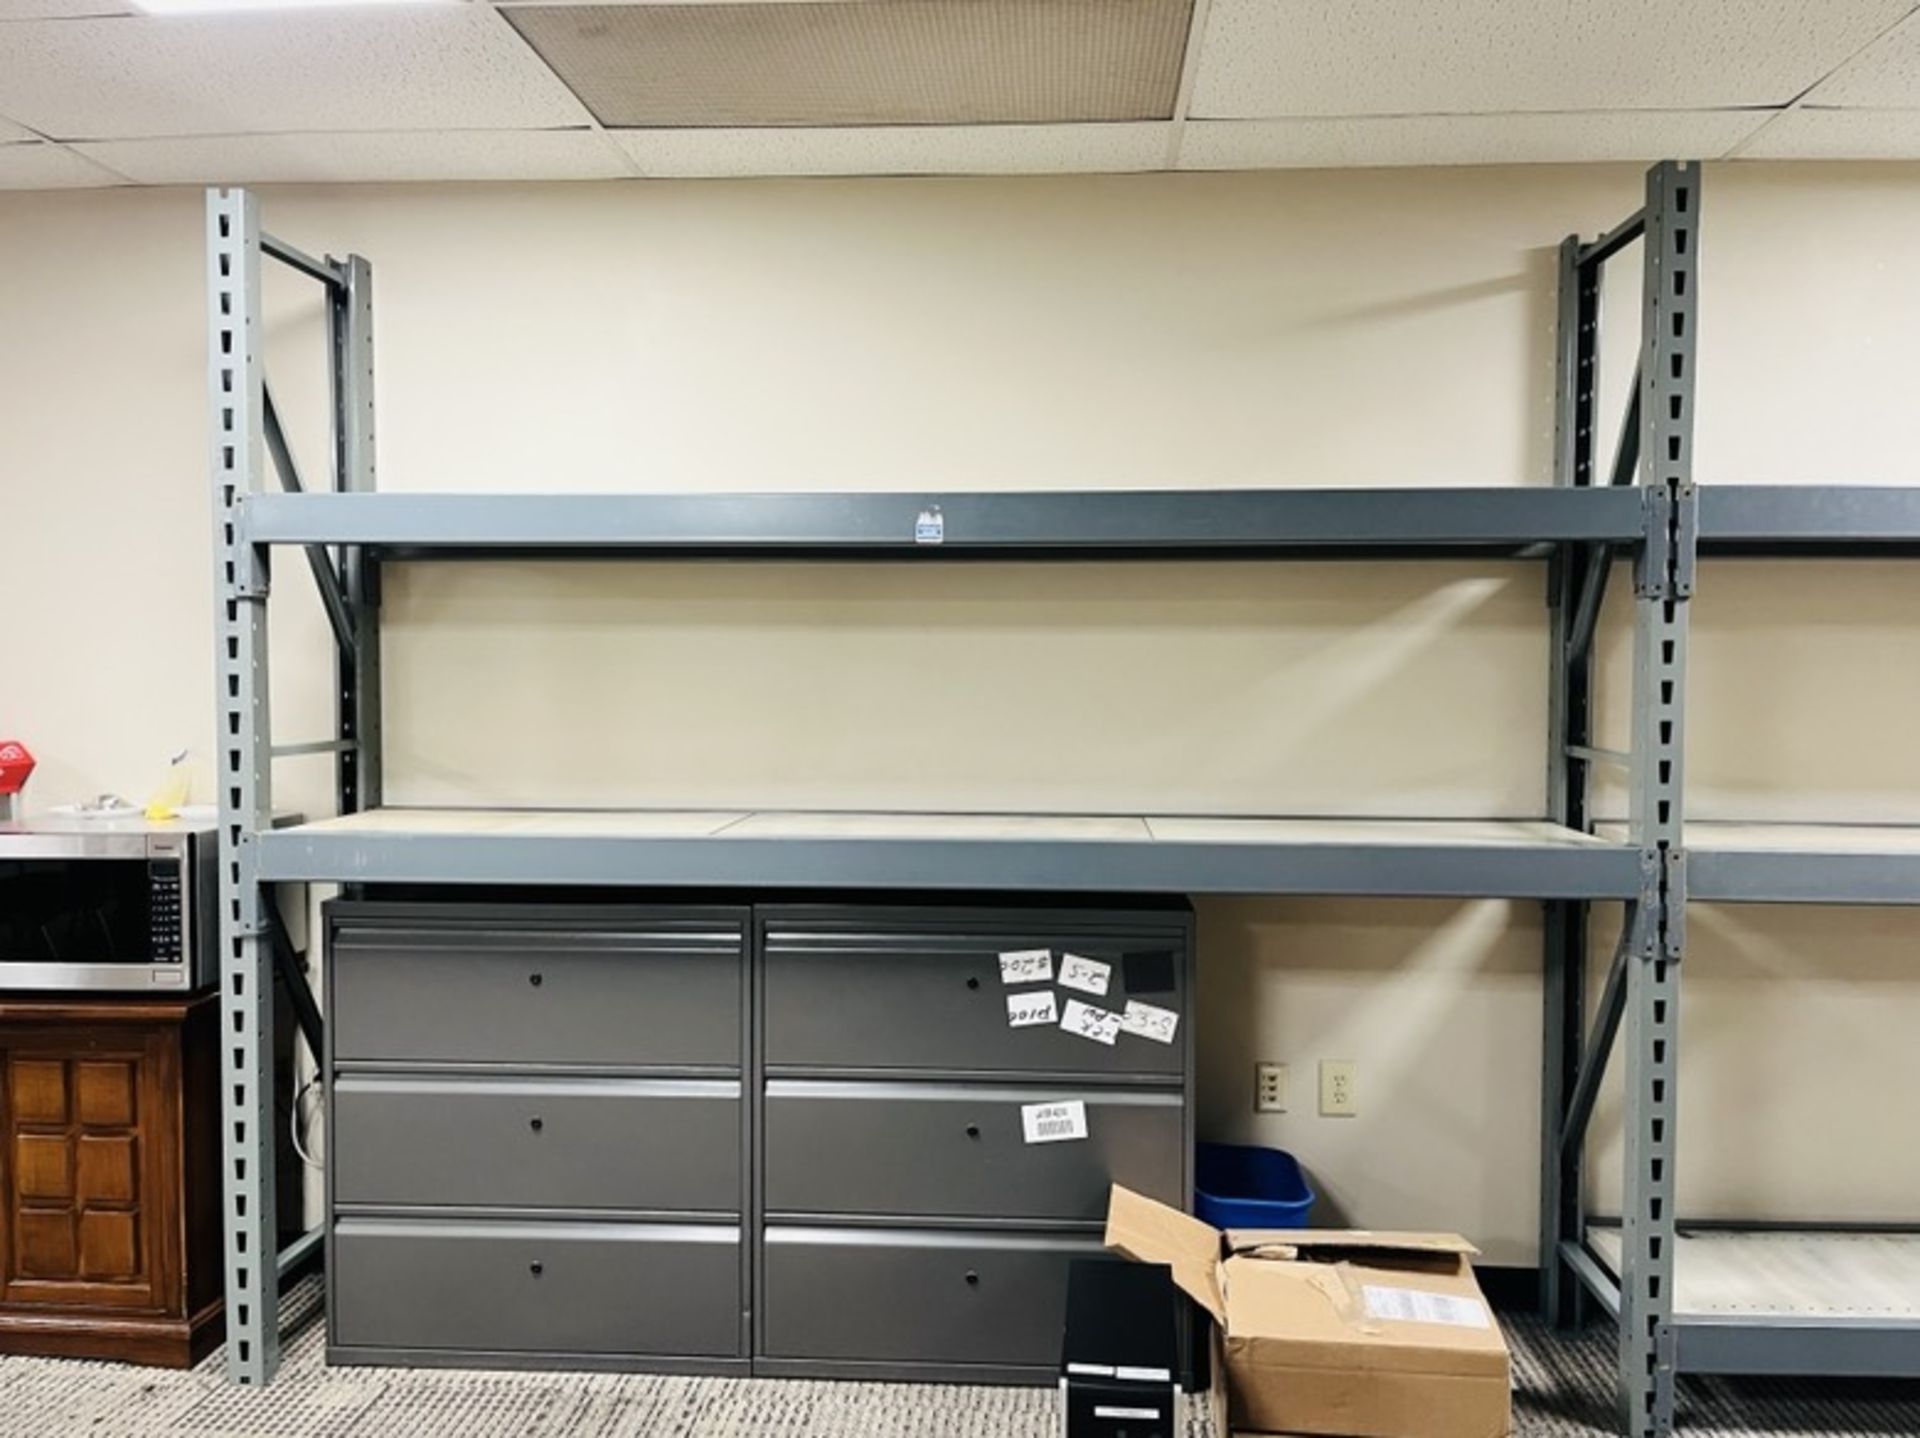 5 SECTION OF RETAIL/MERCHANDISE PALLET RACK SHELVING 8'H X 21.5"D X 108"L WITH 3 SHELVES - Image 2 of 4